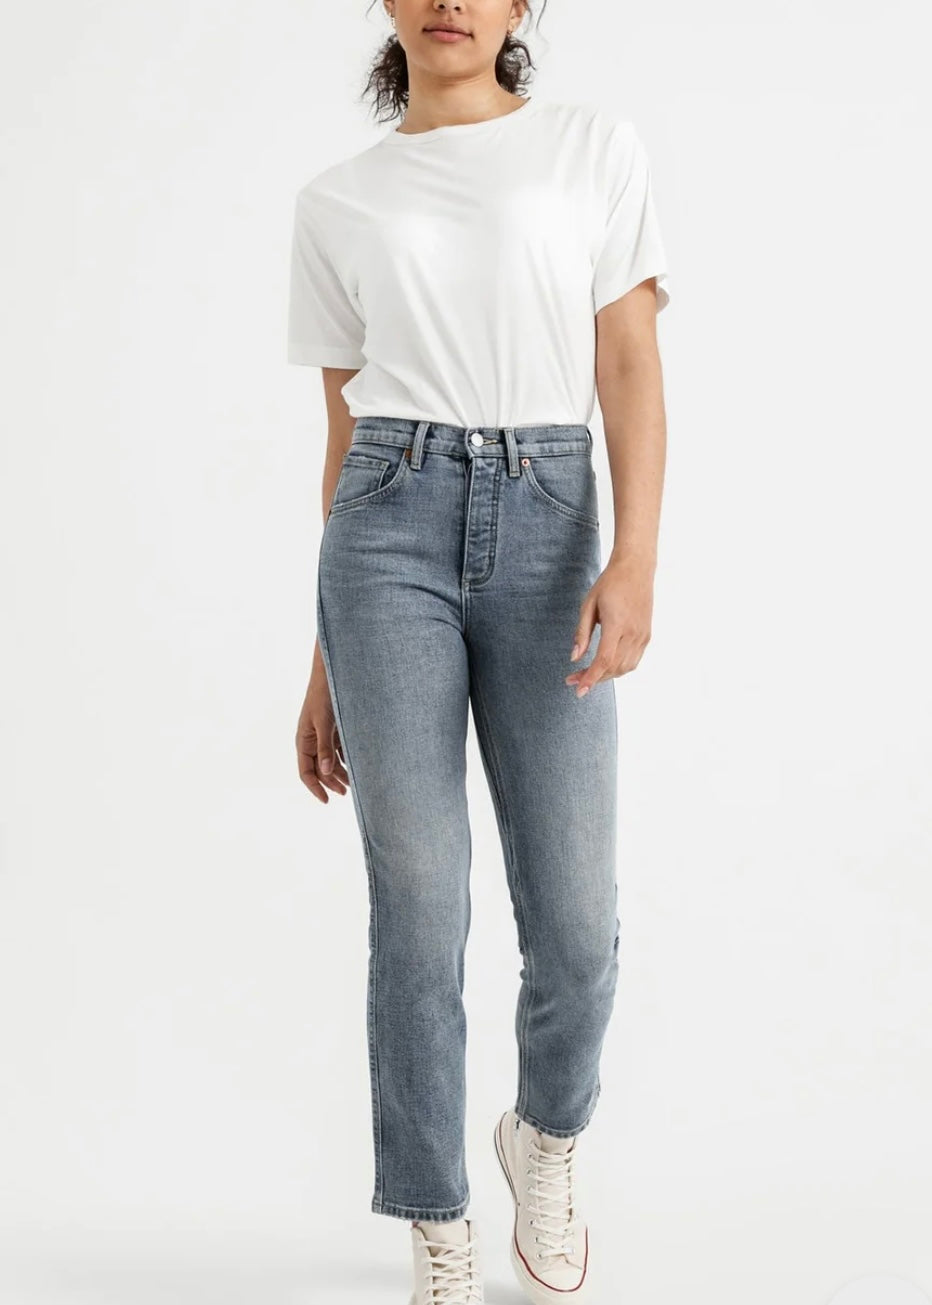 Midweight Performance Denim High Rise Straight in Vintage